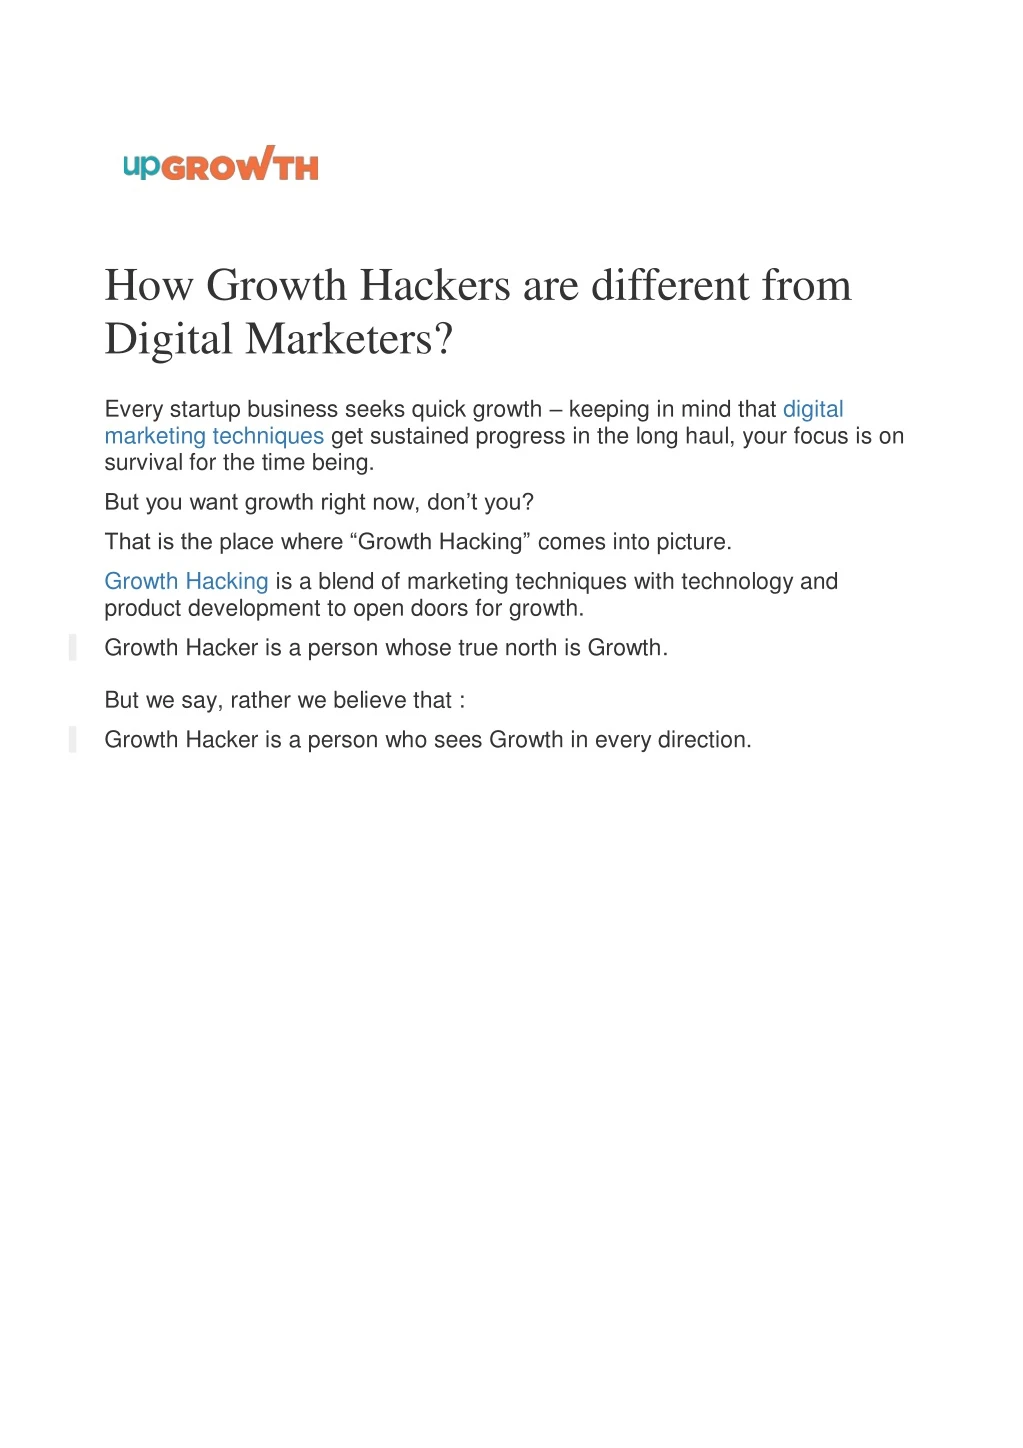 how growth hackers are different from digital